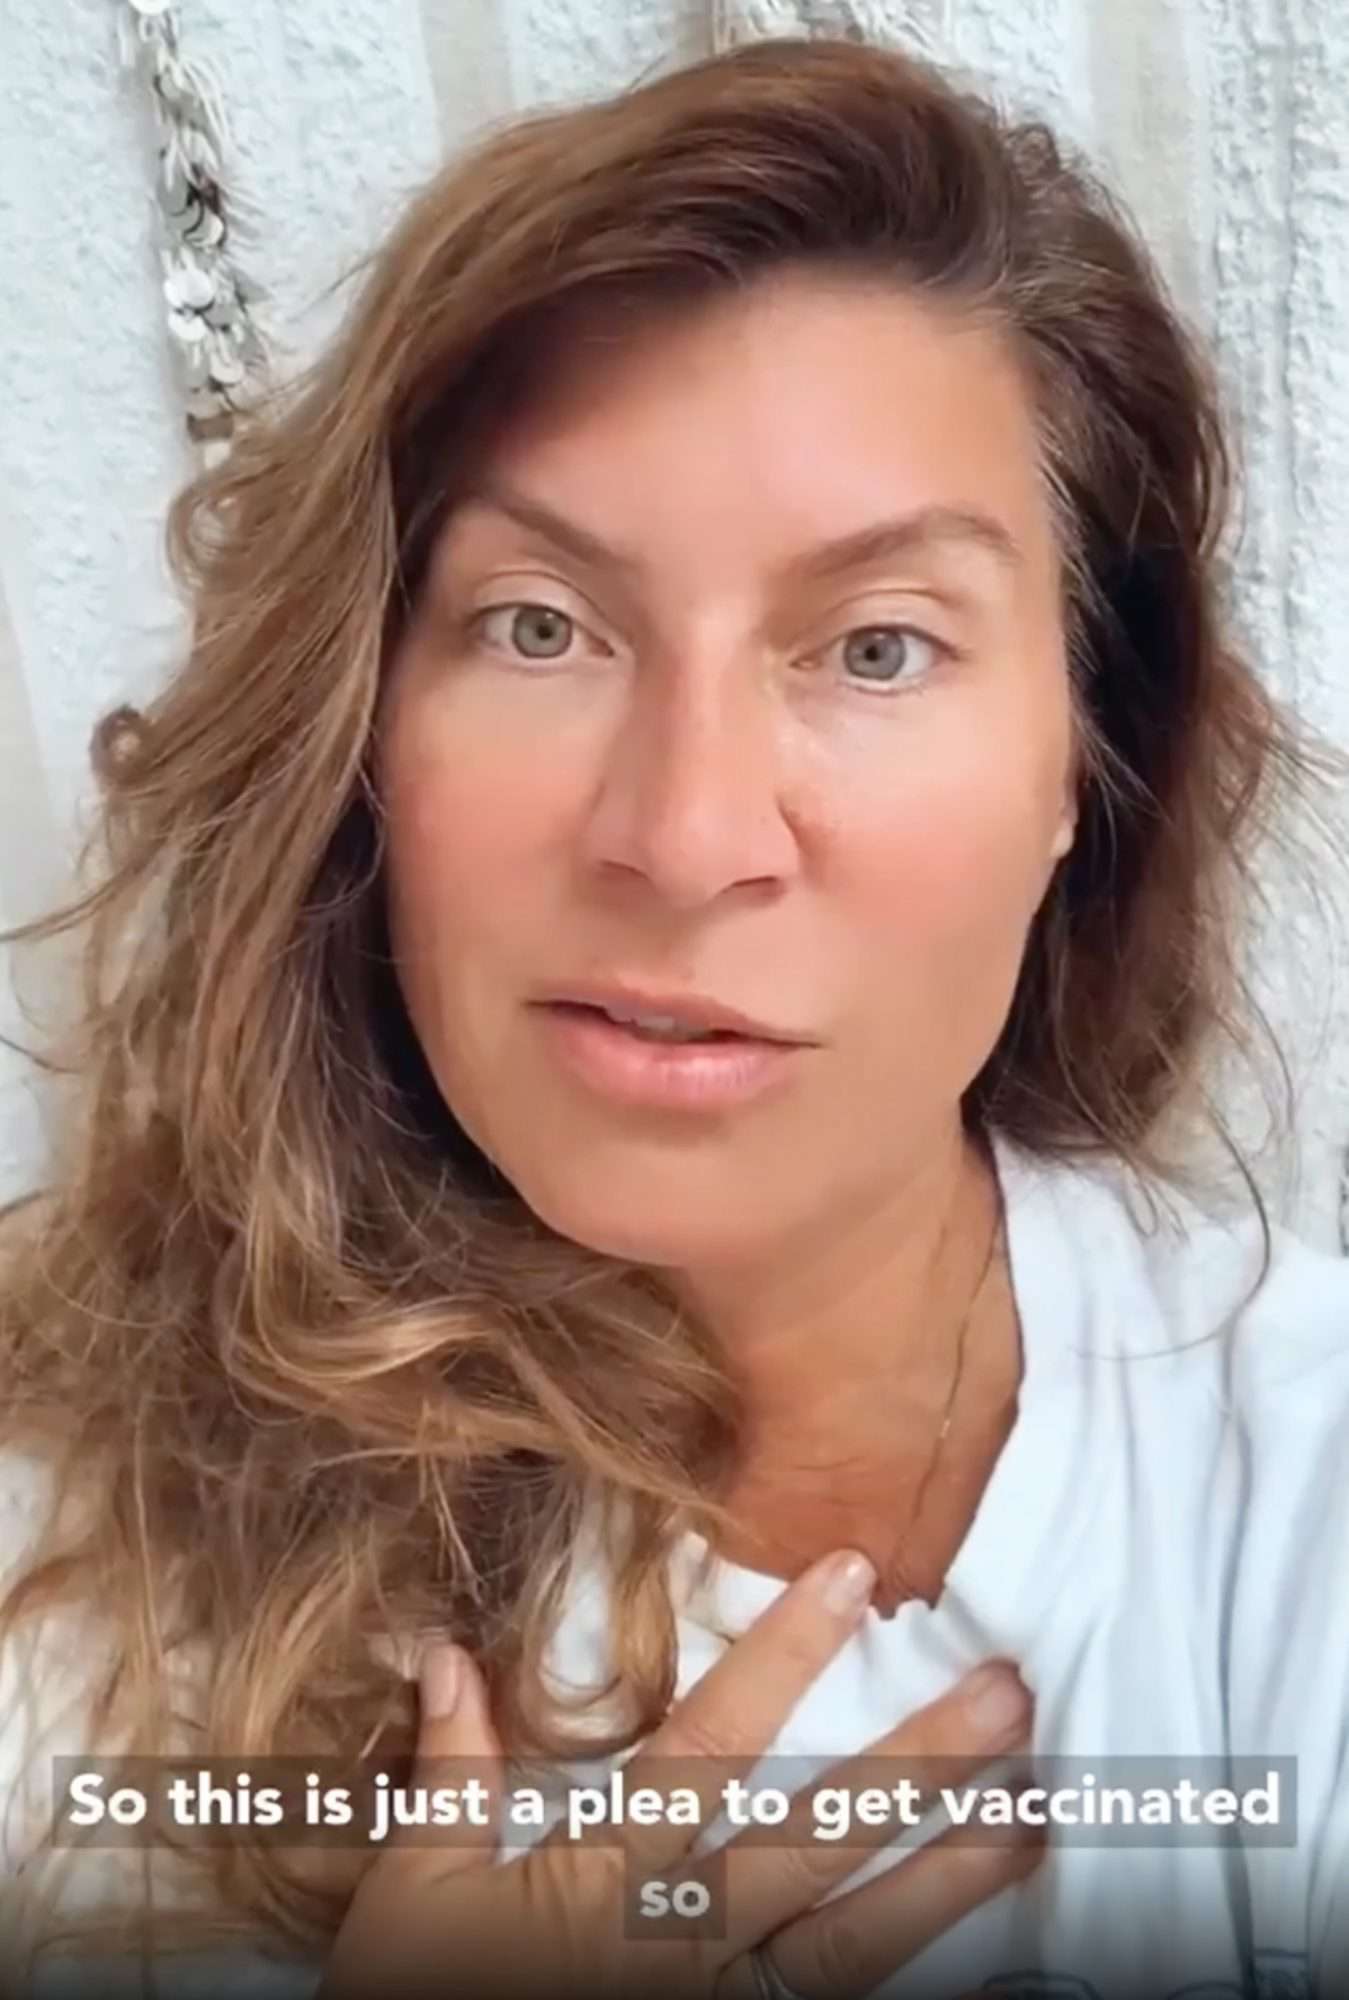 Genevieve Gorder Gives Update on Her Battle Against Delta Variant of COVID: 'This Really Sucks' - PEOPLE